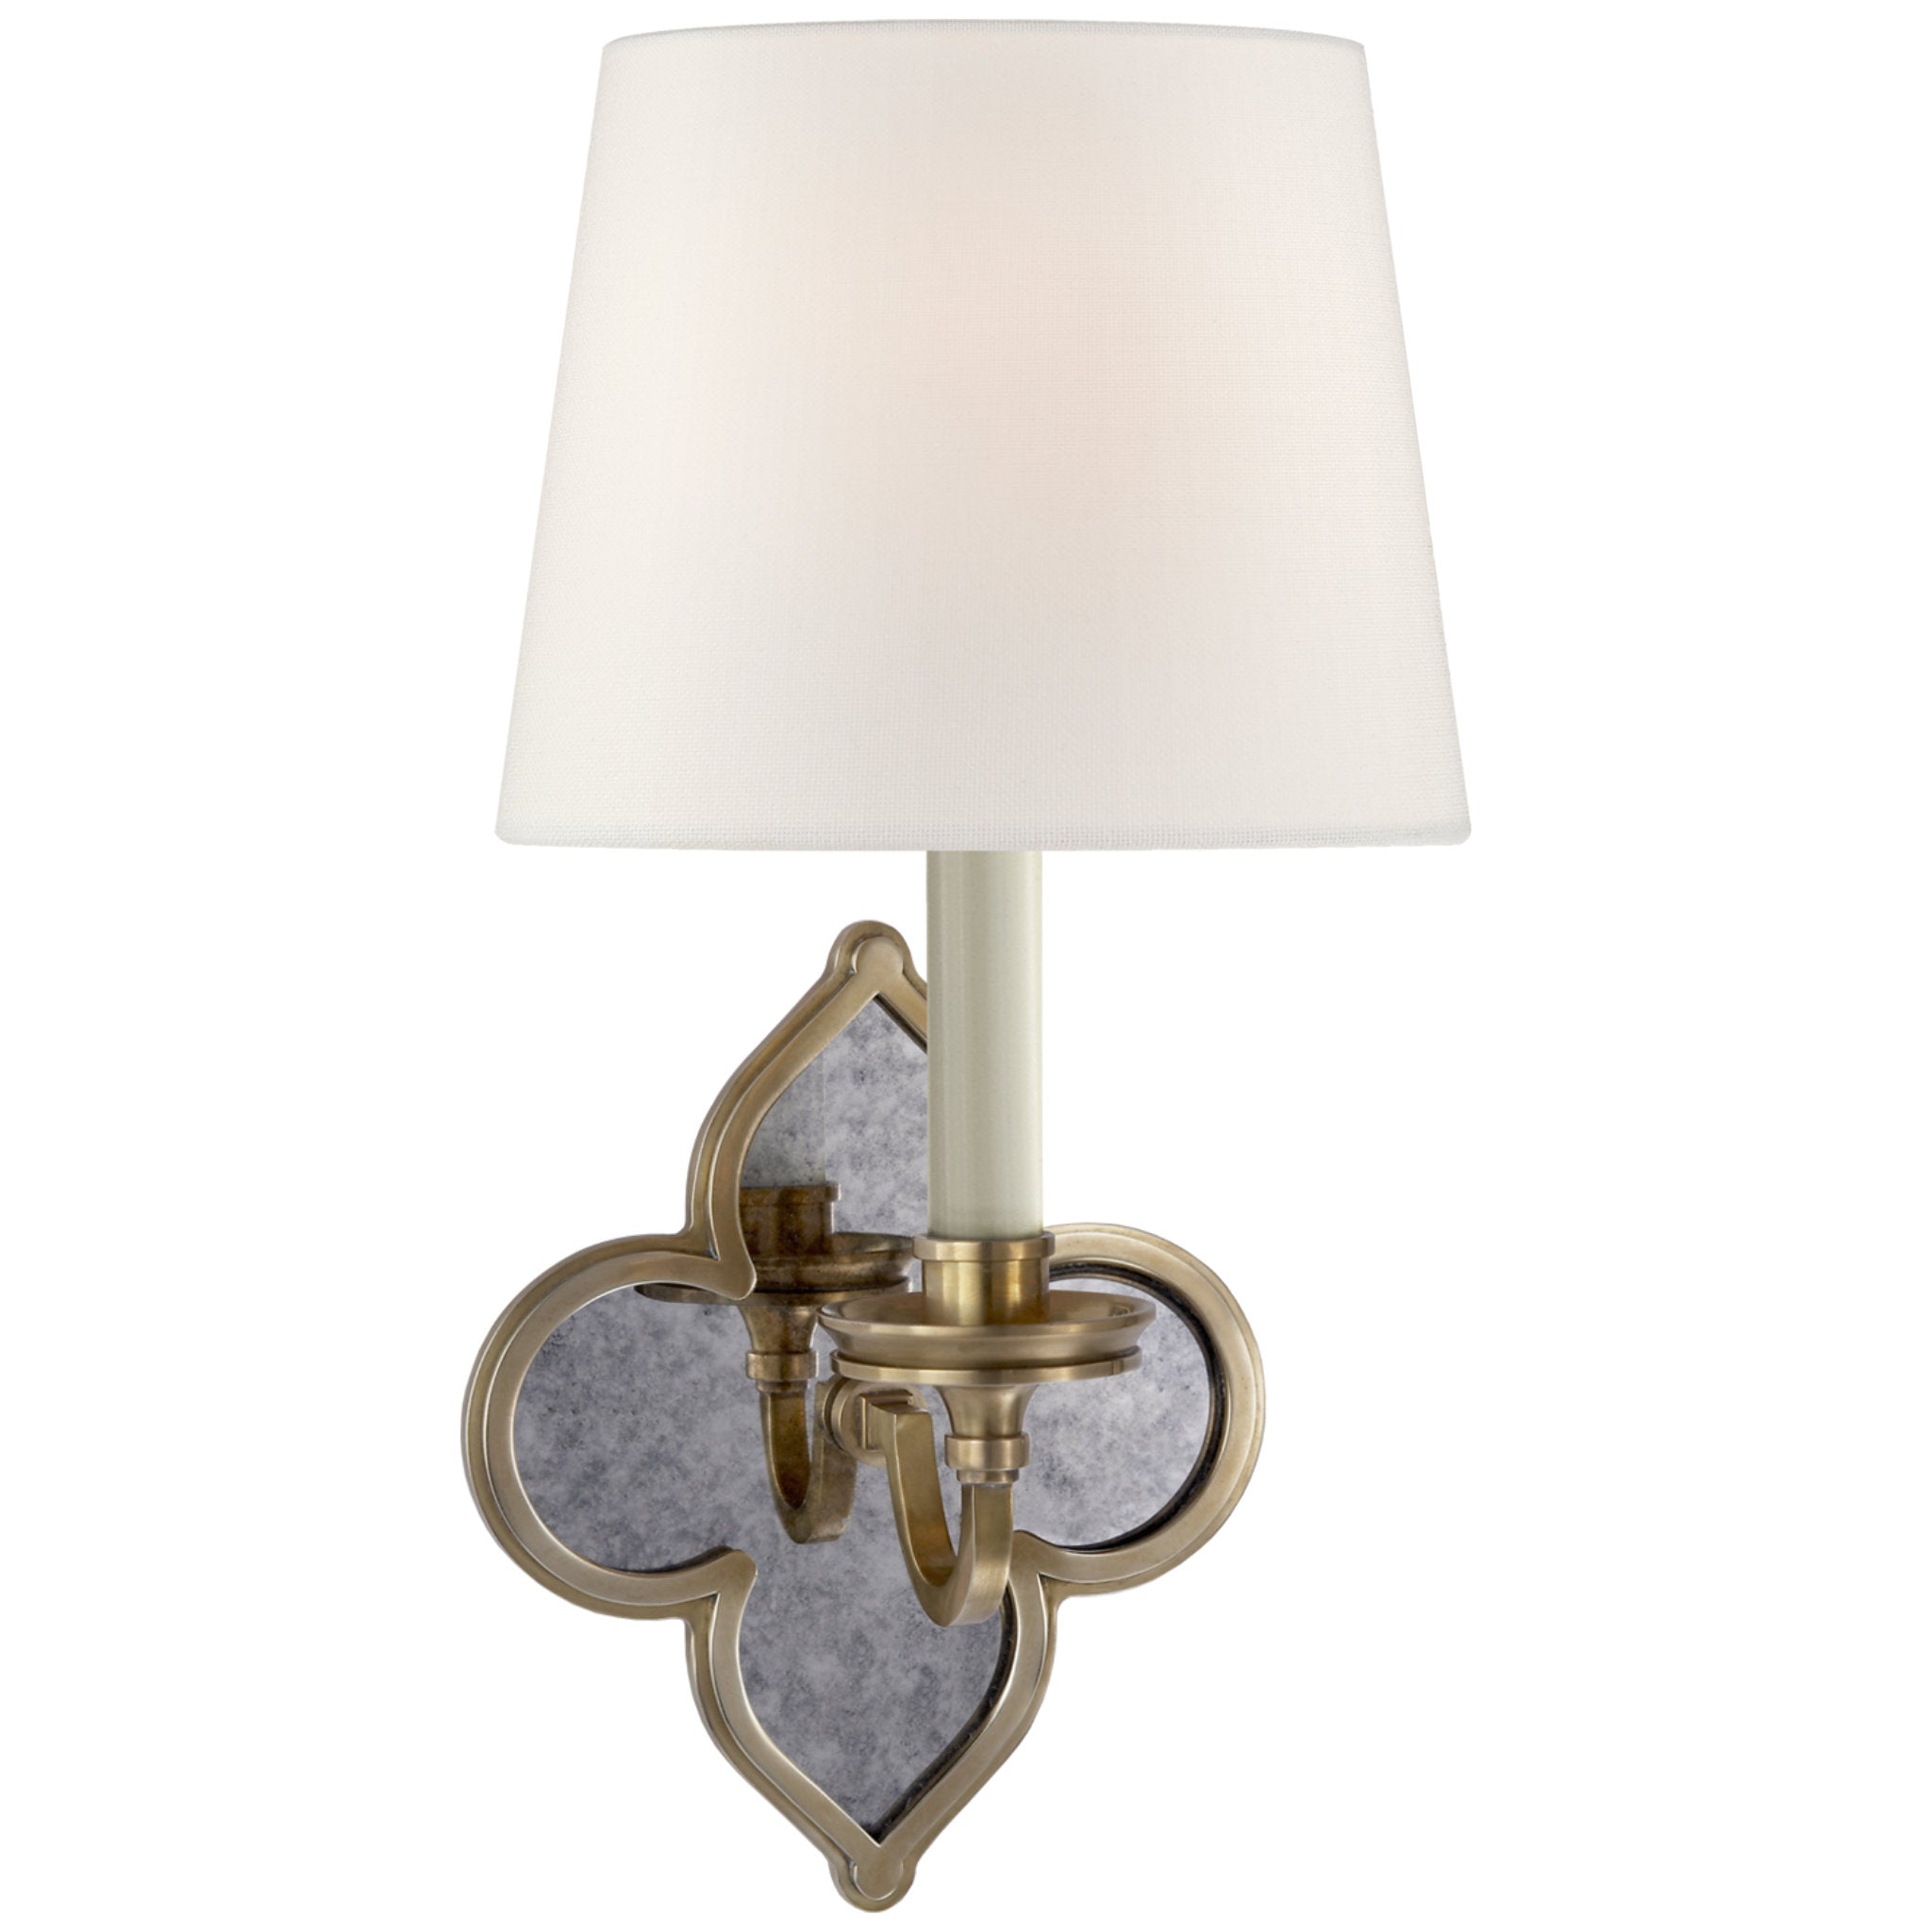 Alexa Hampton Lana Single Sconce in Natural Brass and Antique Mirror with Linen Shade